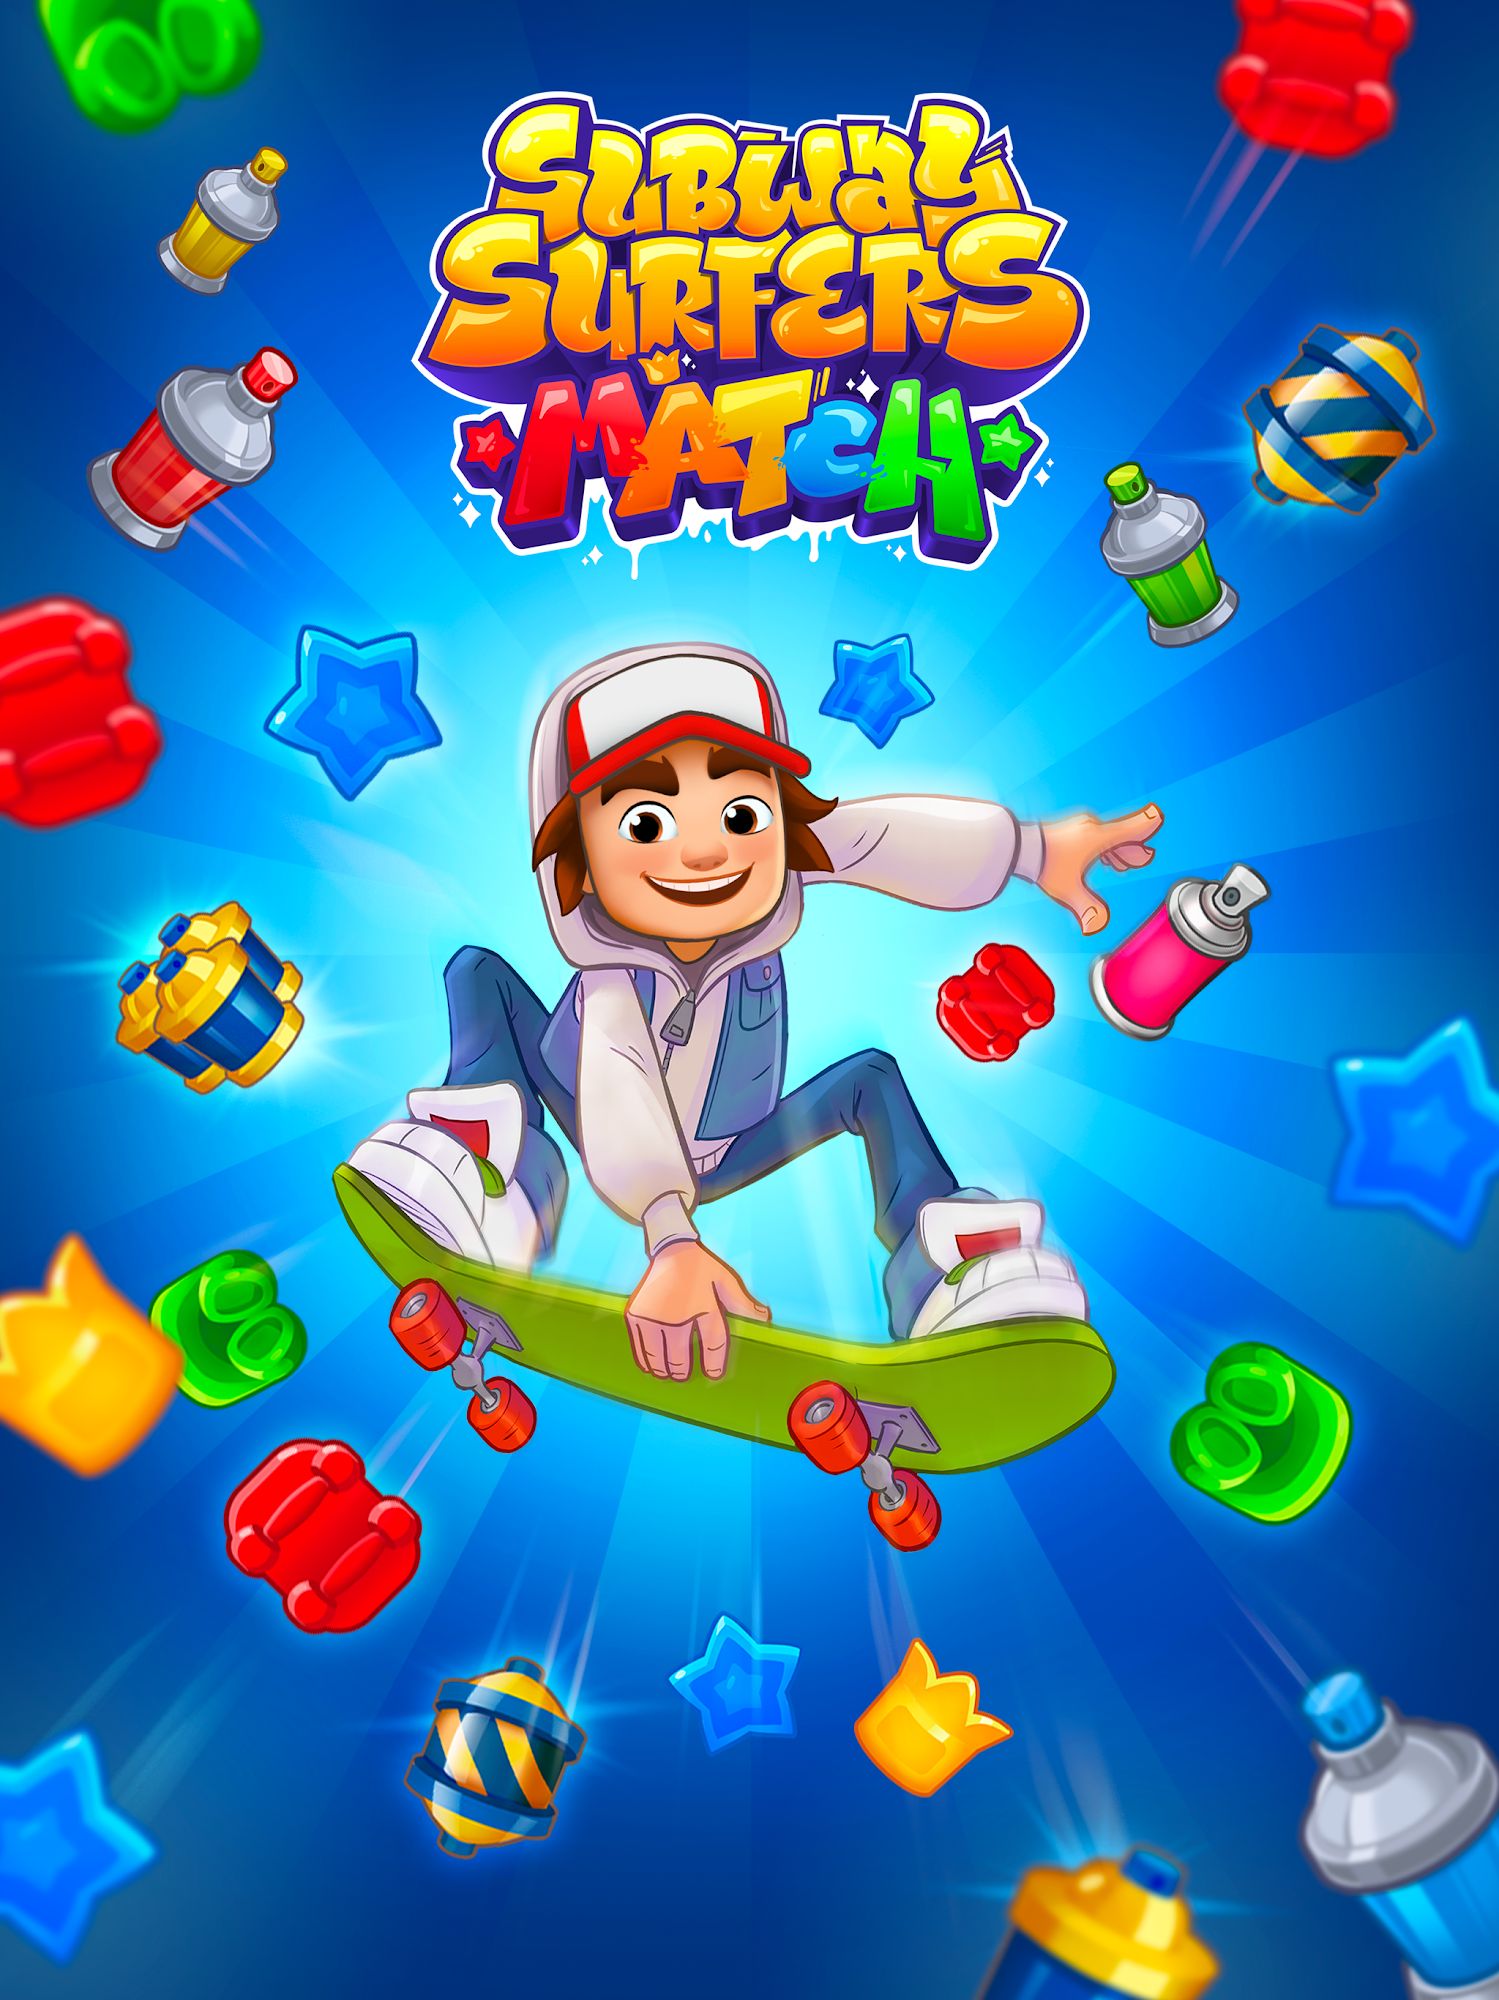 Full version of Android apk app Subway Surfers Match for tablet and phone.